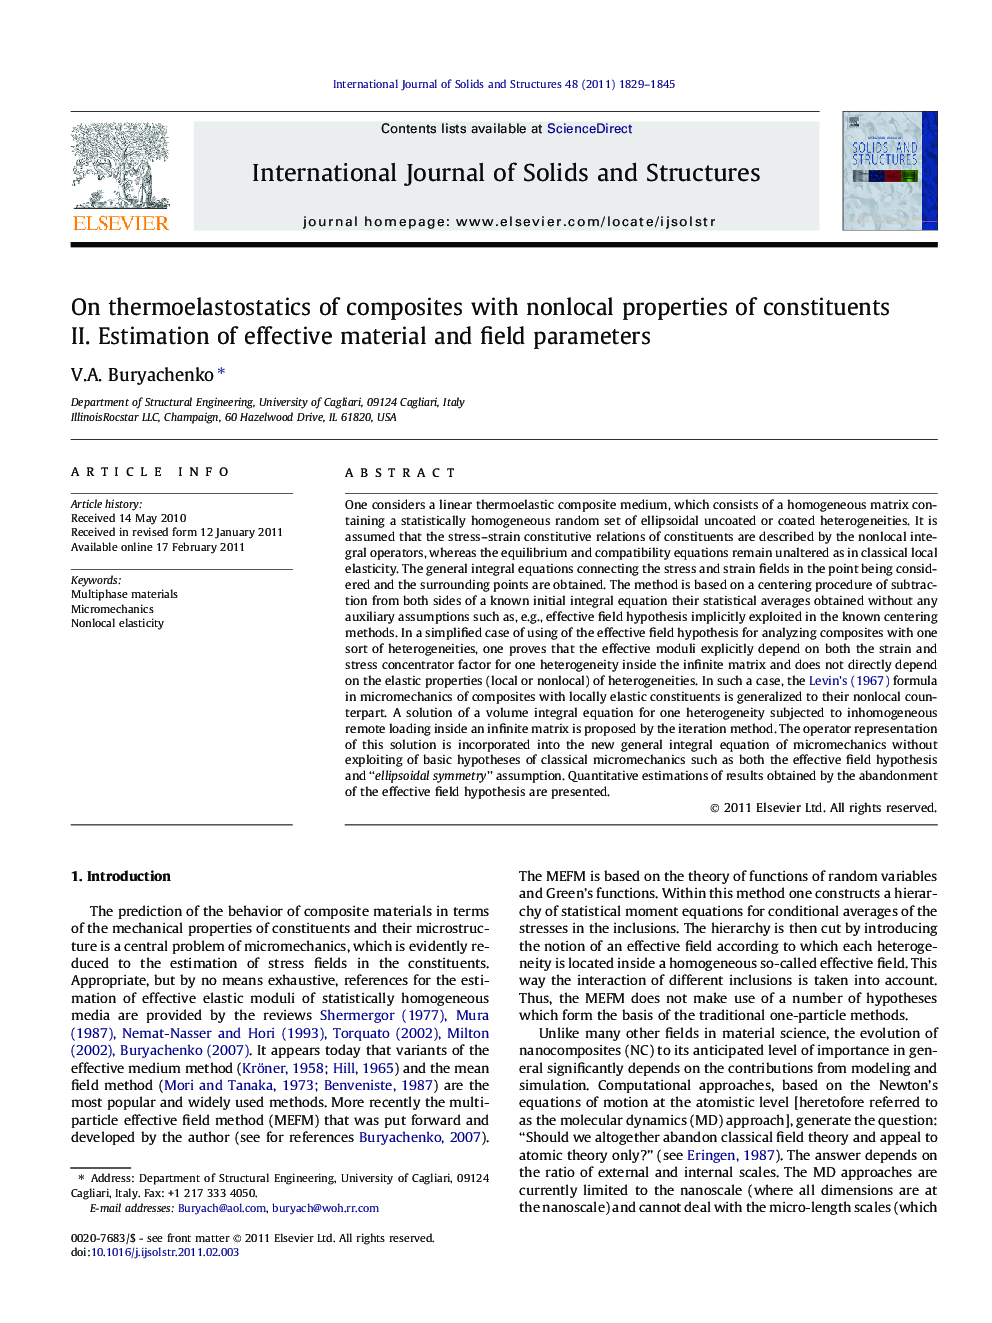 On thermoelastostatics of composites with nonlocal properties of constituents II. Estimation of effective material and field parameters